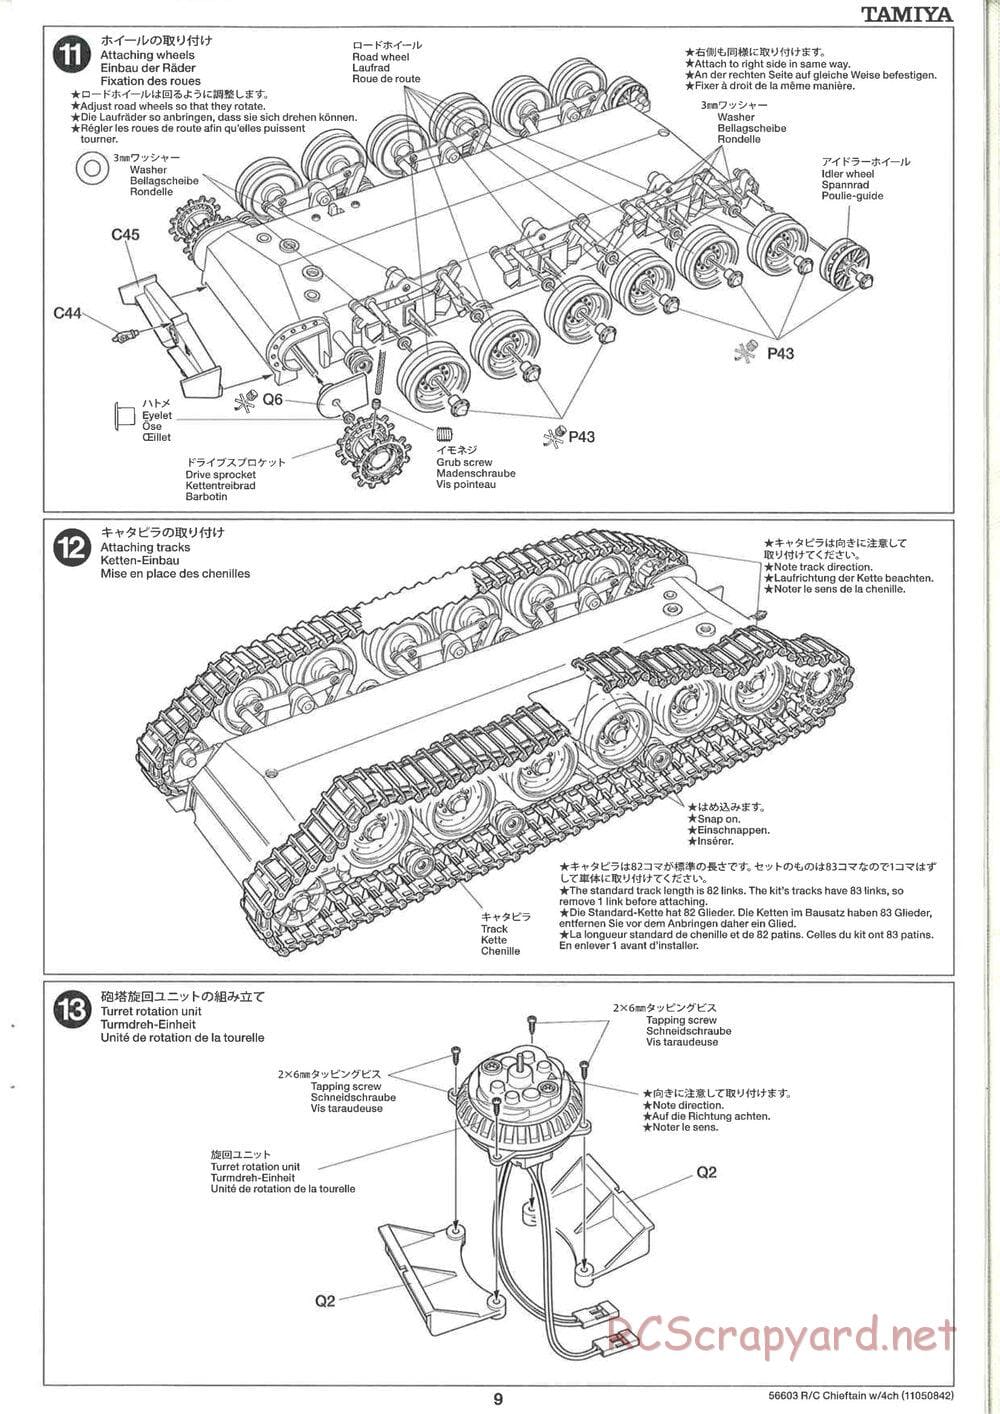 Tamiya - British Army Battle Tank Cheiftain - 1/25 Scale Chassis - Manual - Page 9